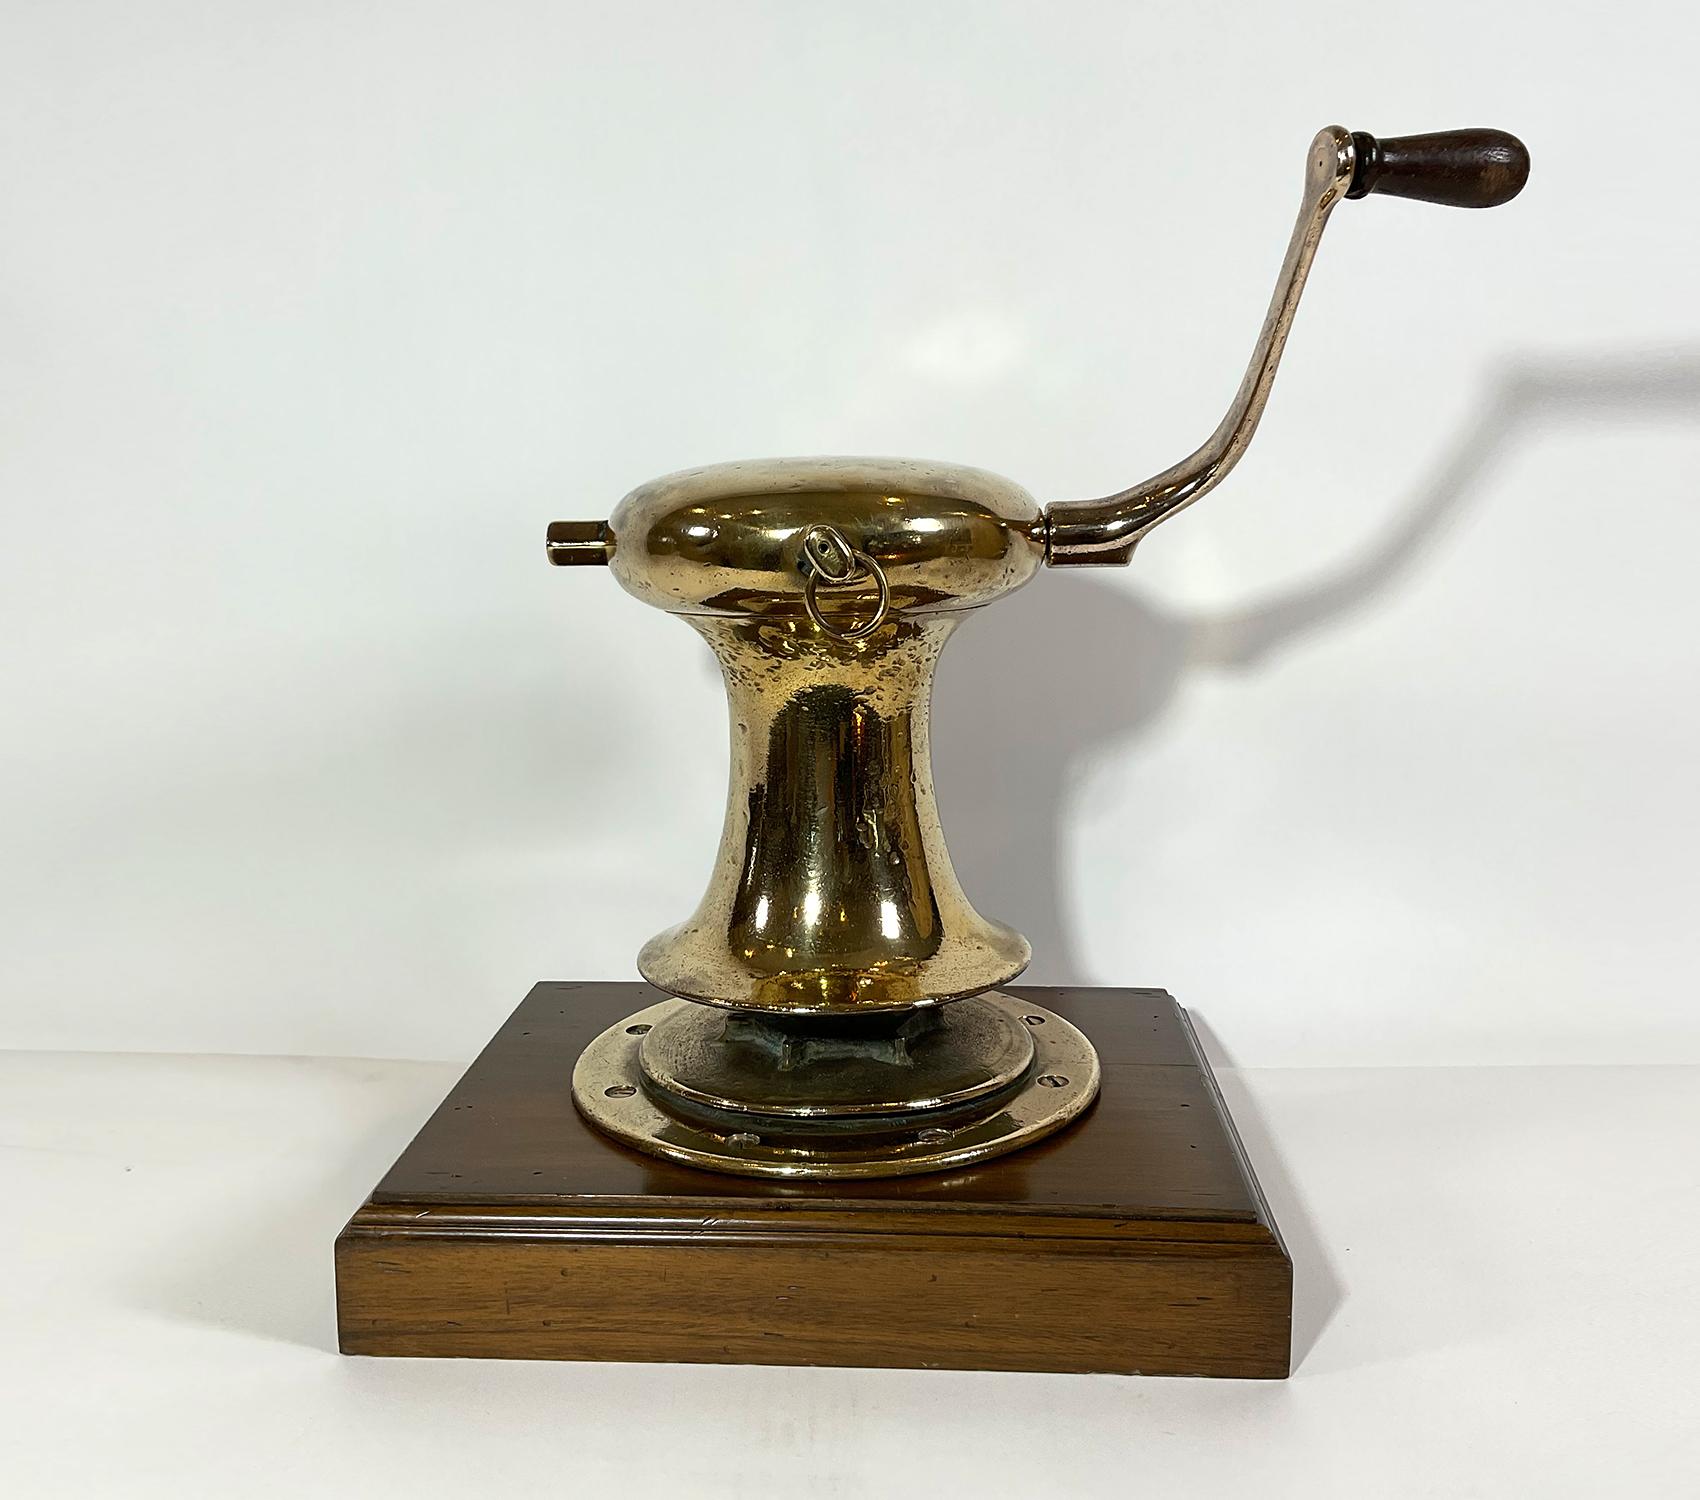 Outstanding early twentieth century yacht capstan by Herreshoff. With working gears, crank handle, speed switch, mounted to a thick wood base. Circa 1925.